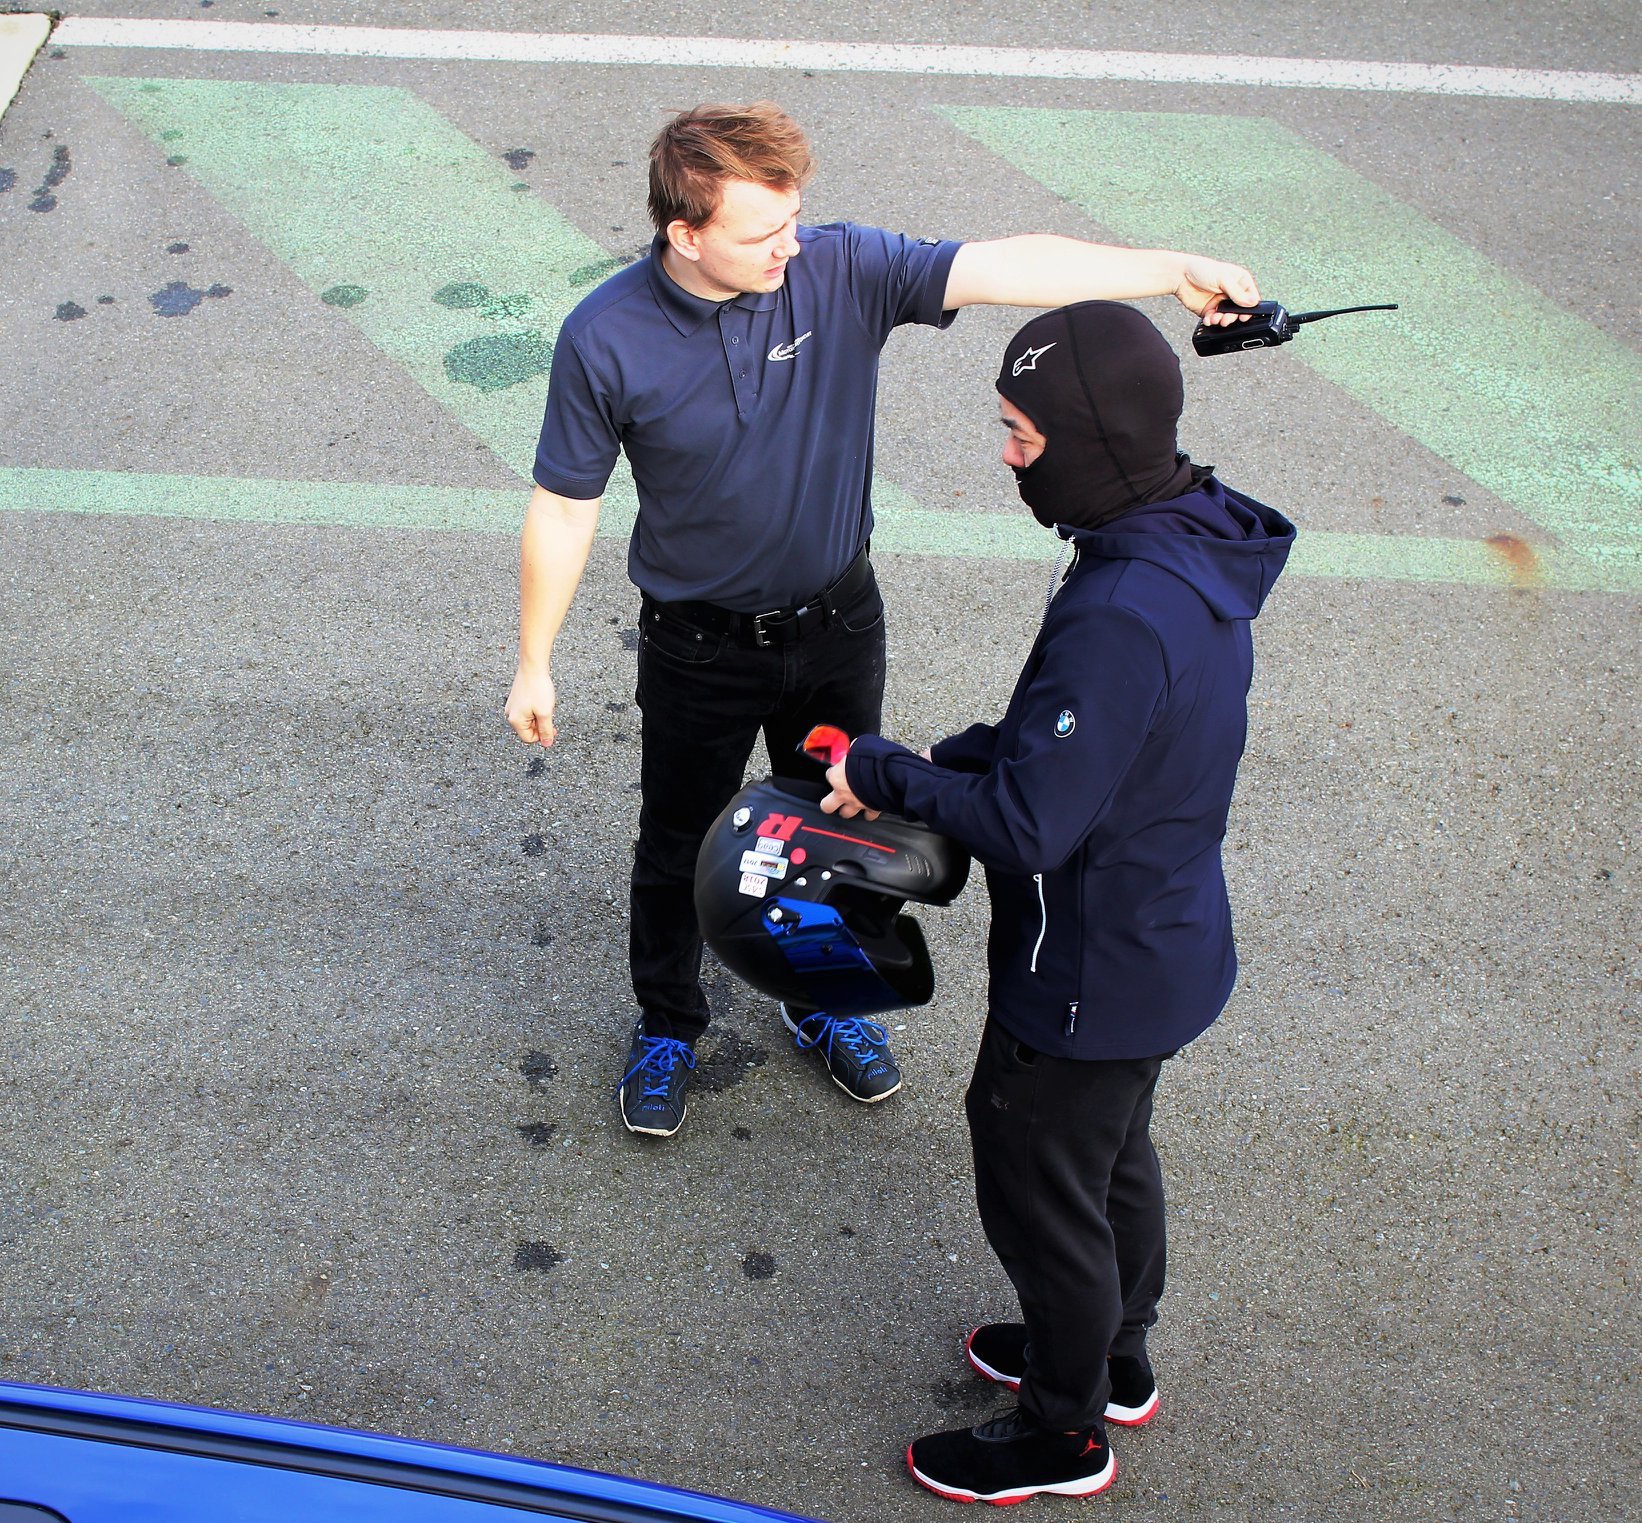 Instructor talking to driver during high performance driving event